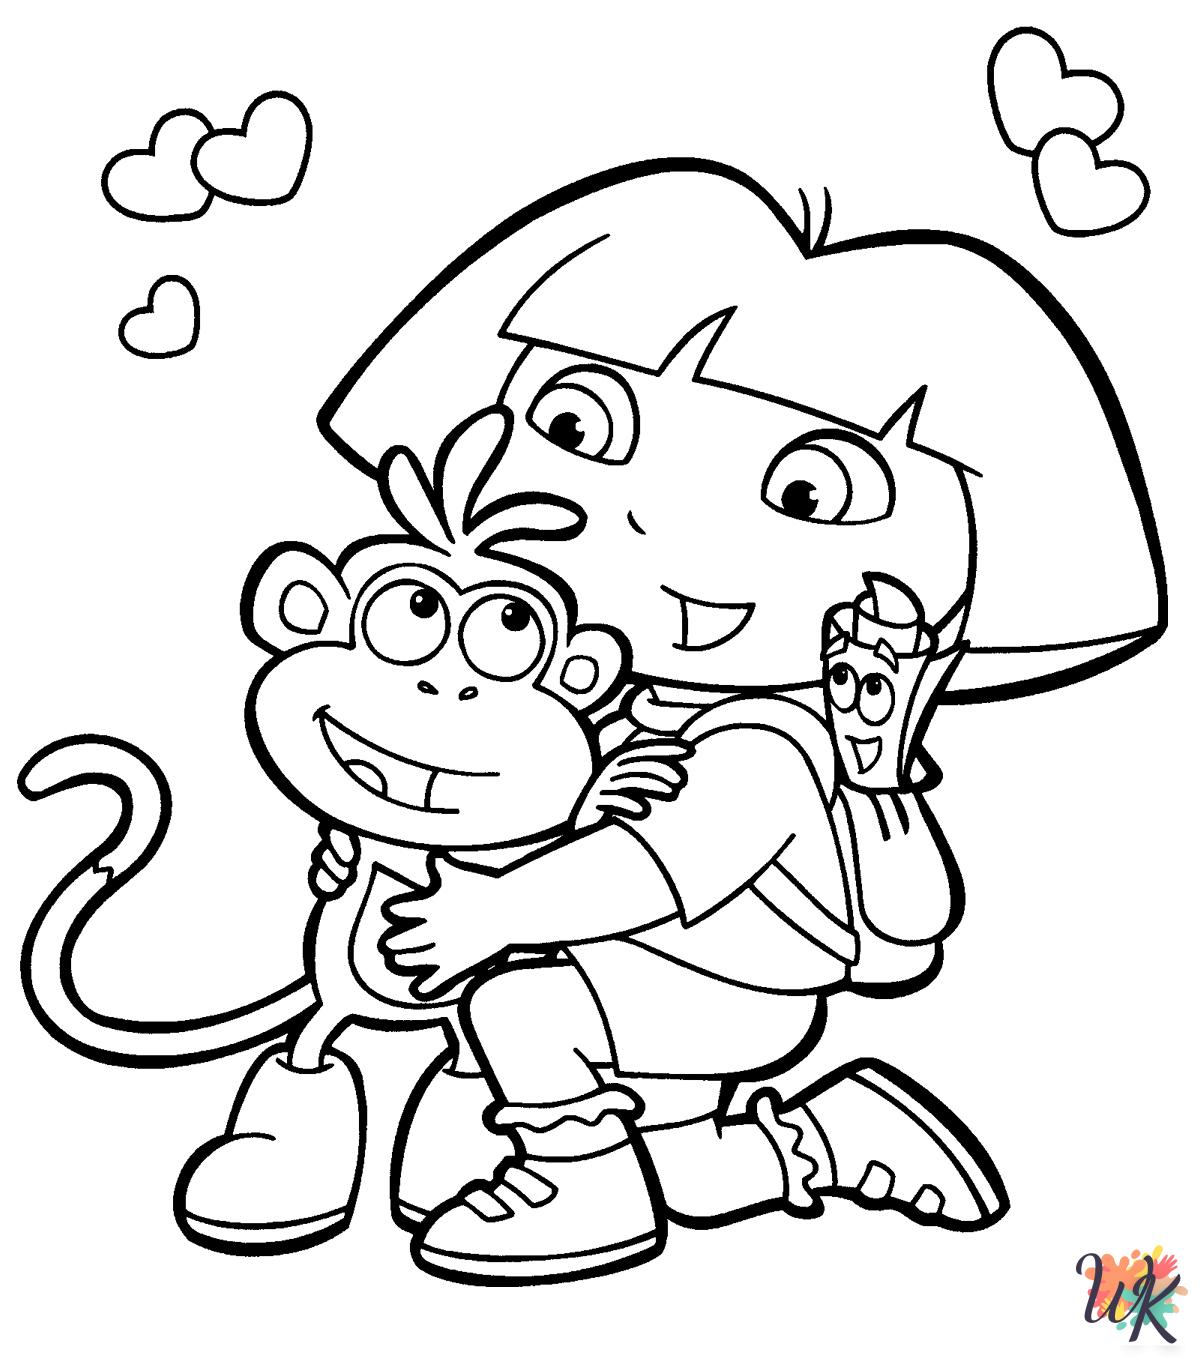 Dora Christmas coloring pages for kids